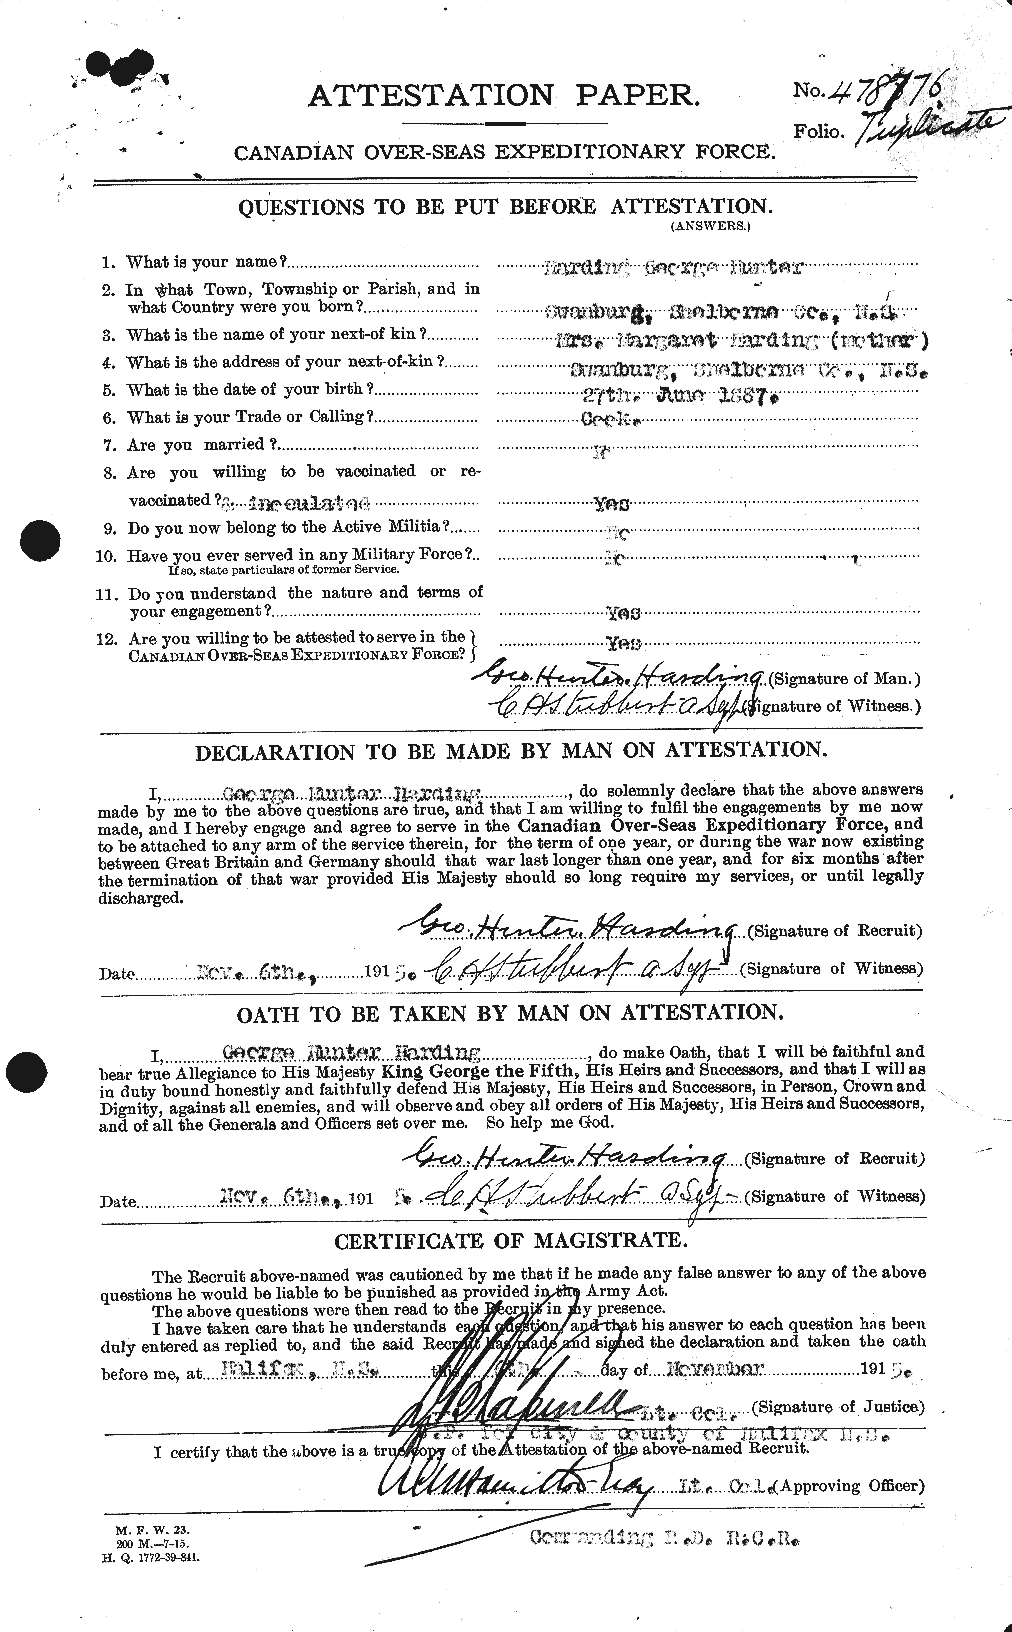 Personnel Records of the First World War - CEF 379653a